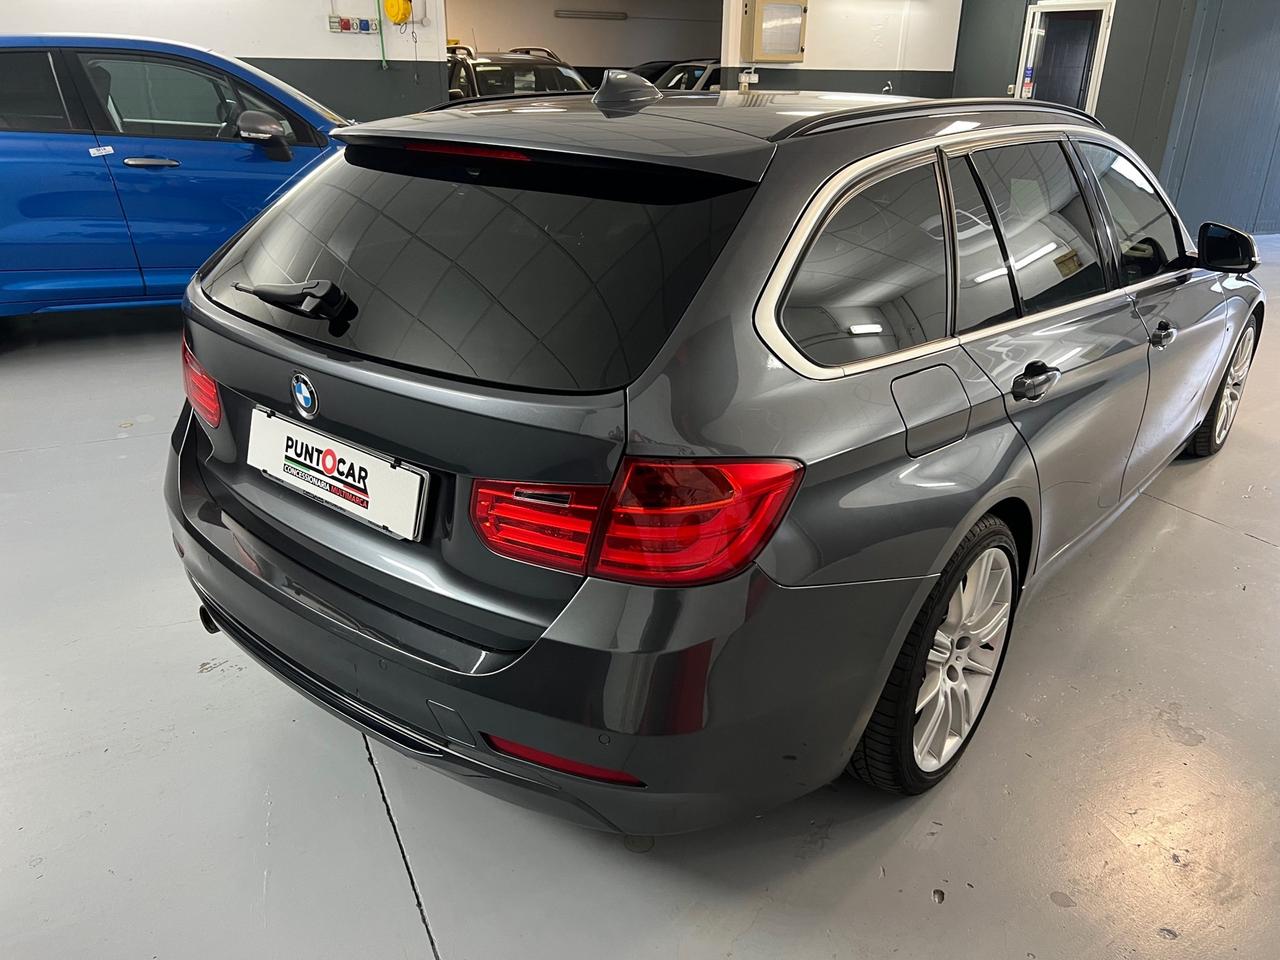 Bmw 318d Touring Sport MOTORE NUOVO